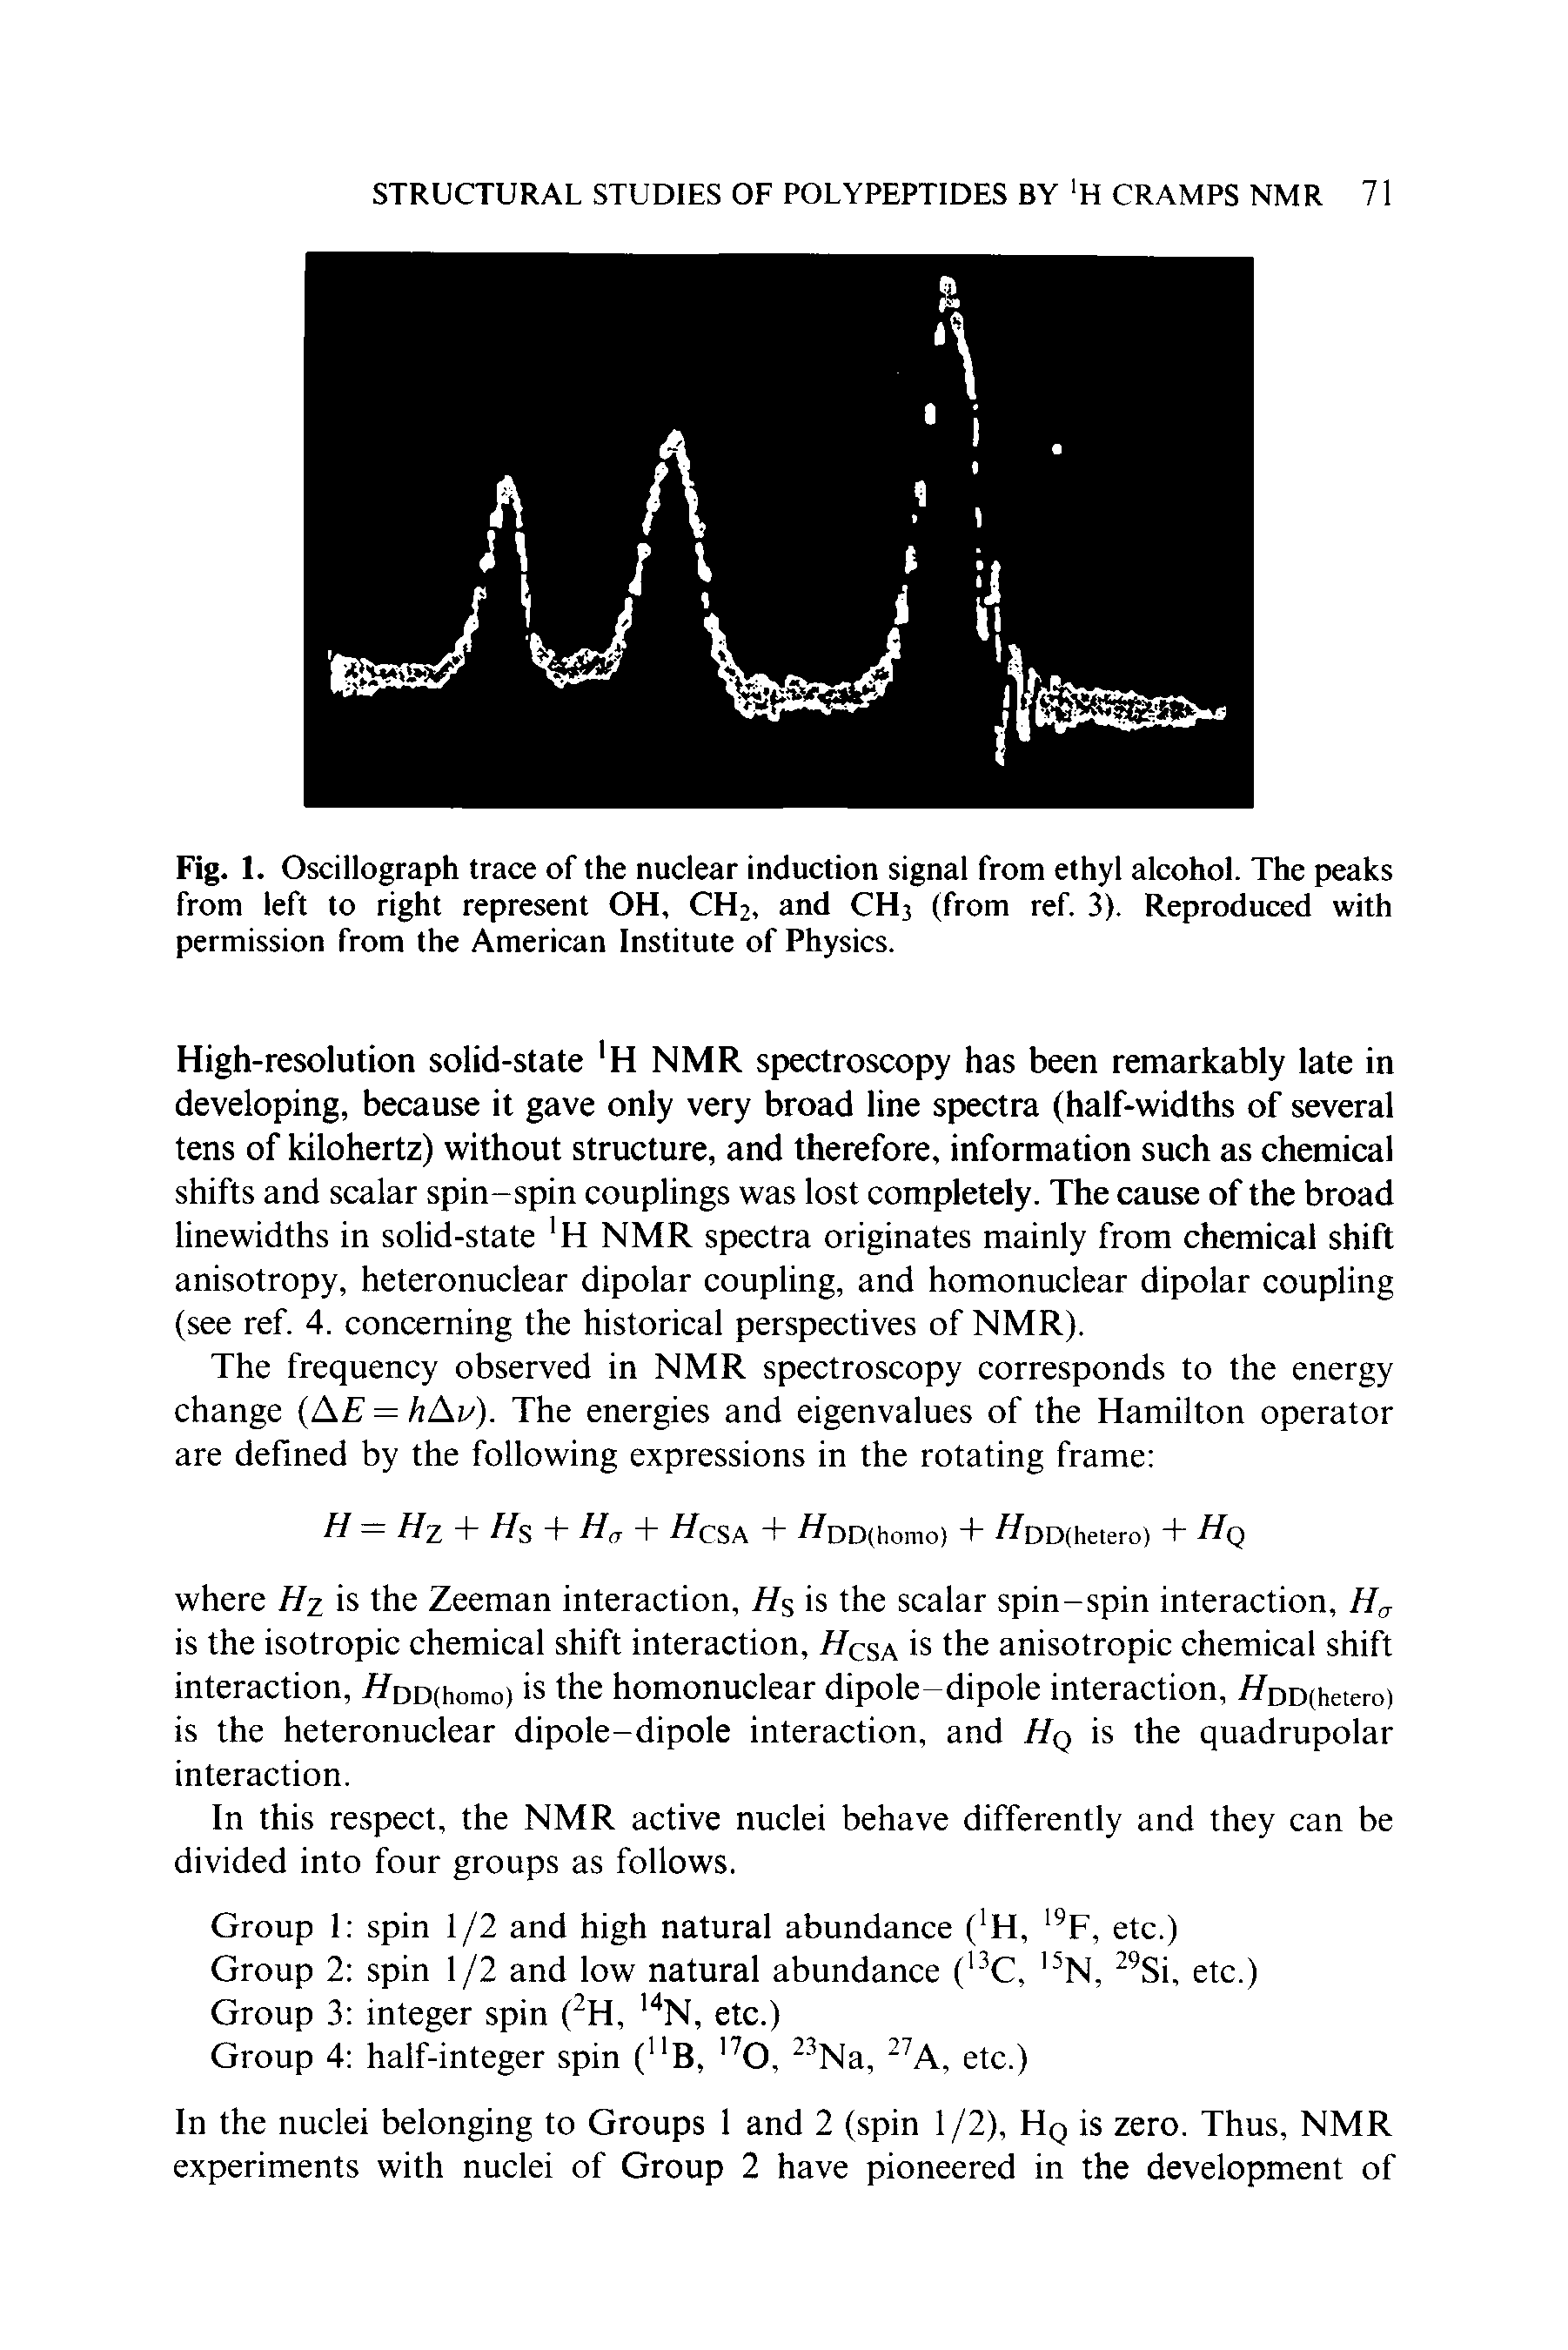 Fig. 1. Oscillograph trace of the nuclear induction signal from ethyl alcohol. The peaks from left to right represent OH, CH2, and CH, (from ref. 3). Reproduced with permission from the American Institute of Physics.